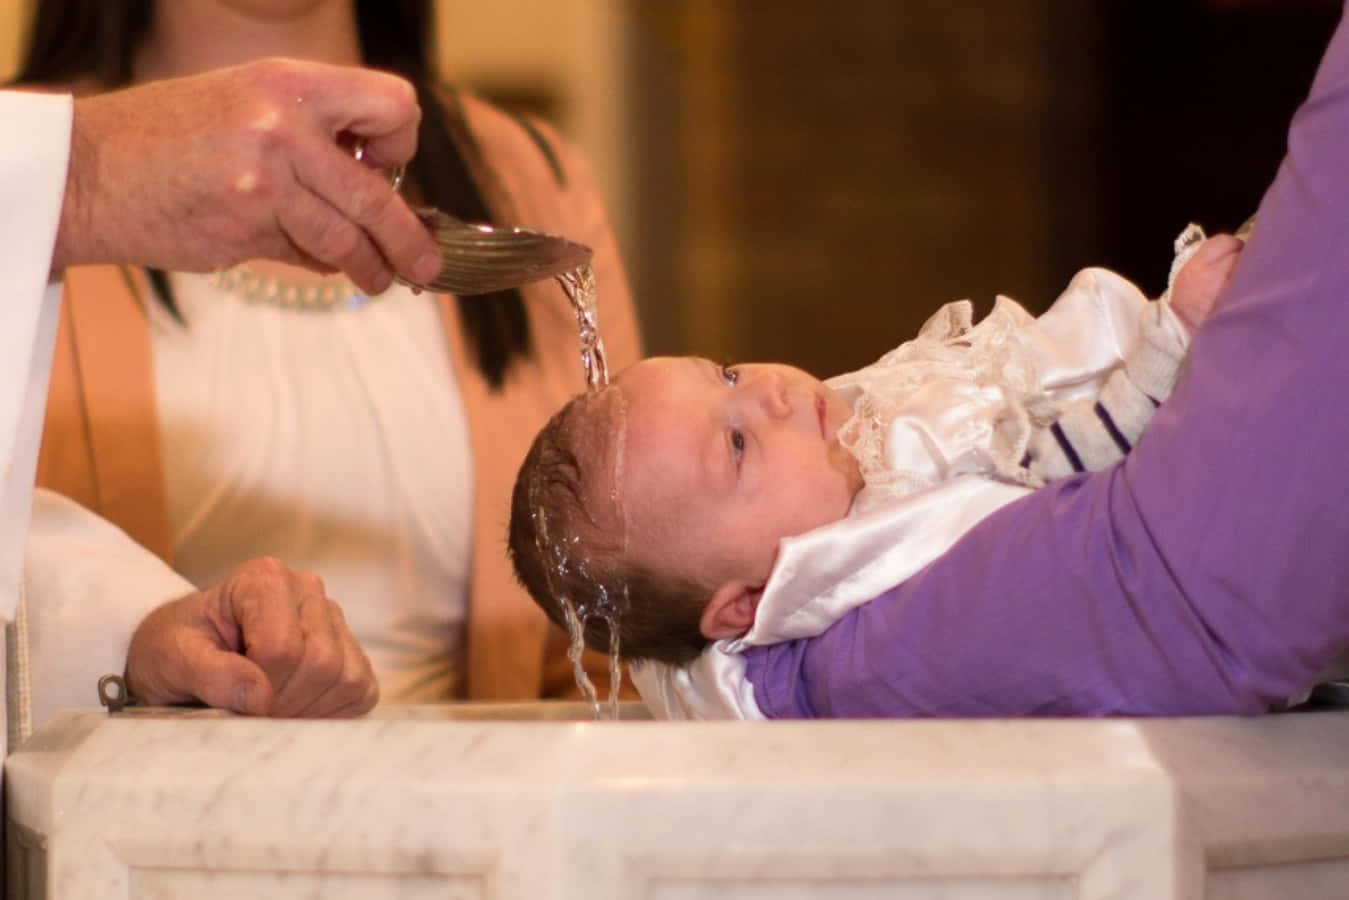 Baptism symbolizes an individual's rebirth into a new life in faith